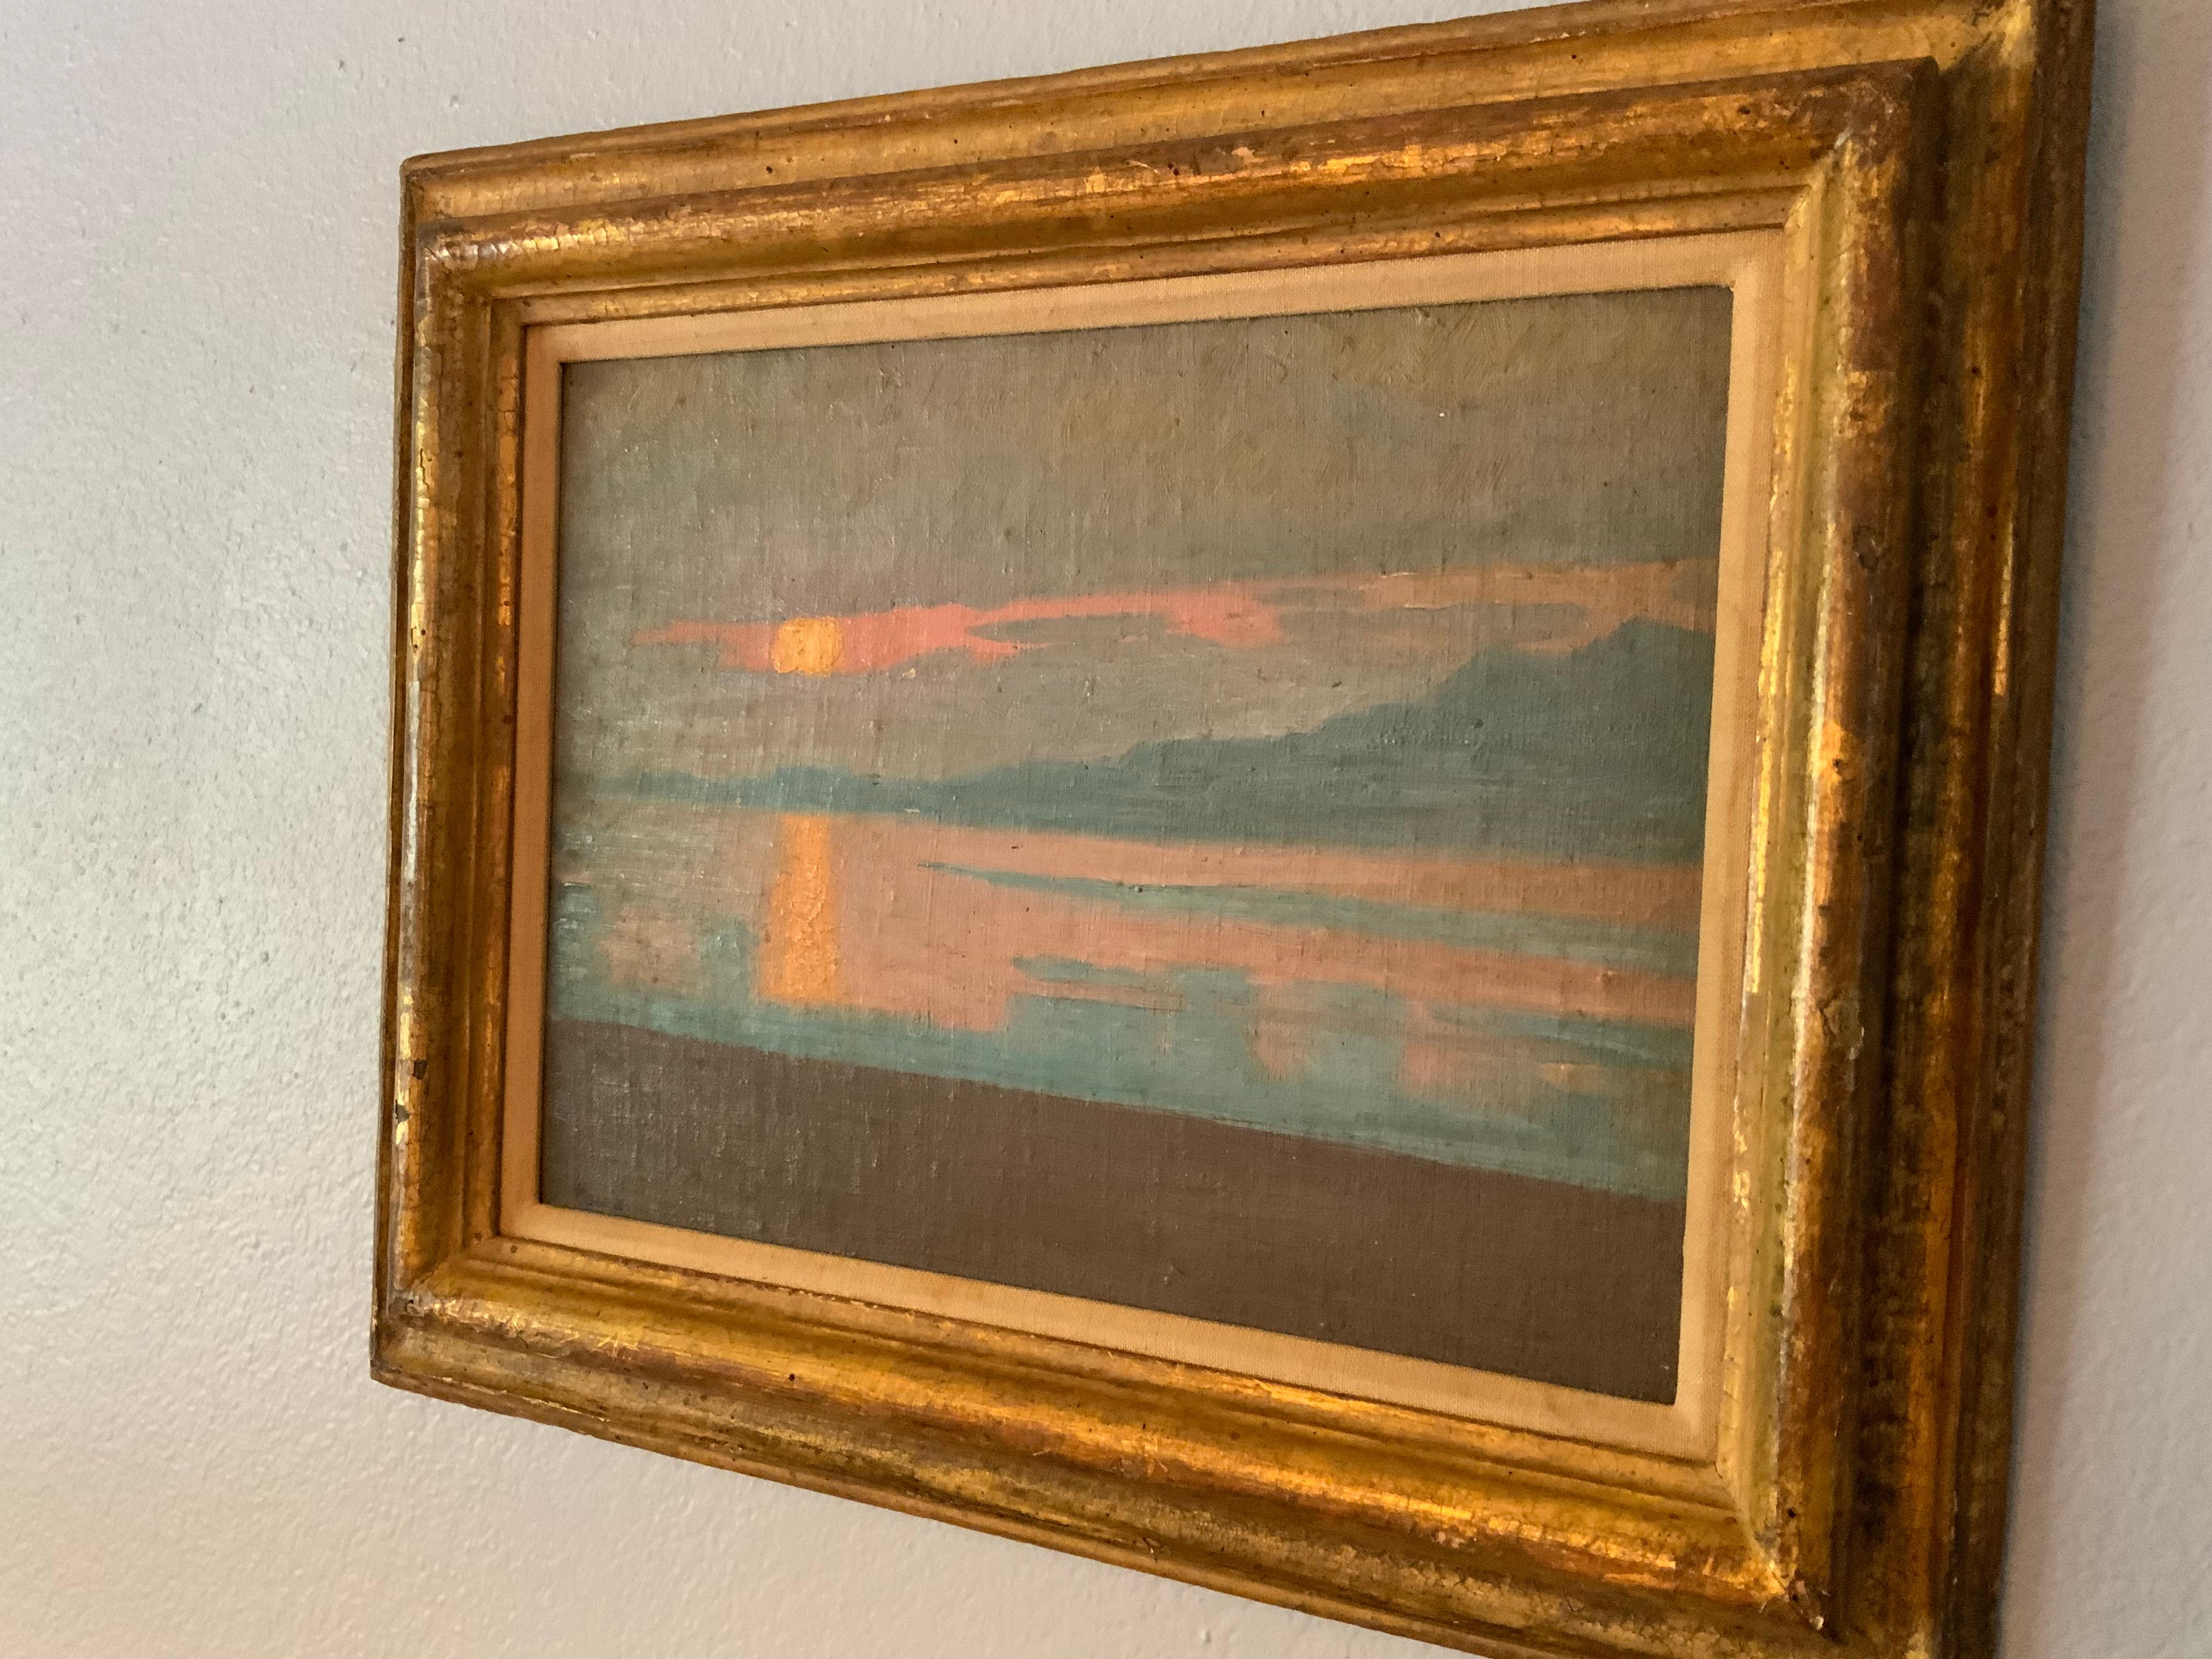 
Framed Oil Painting on Canvas by Rudolf Hause (1877-1961)  A splendid  Painting on canvas by Rudolph Hause depicting a sunset on lake Chiemsee. Back is signed Rudolph Hause Munich Arabella St.   Very  good condition. Original gilt frame with some